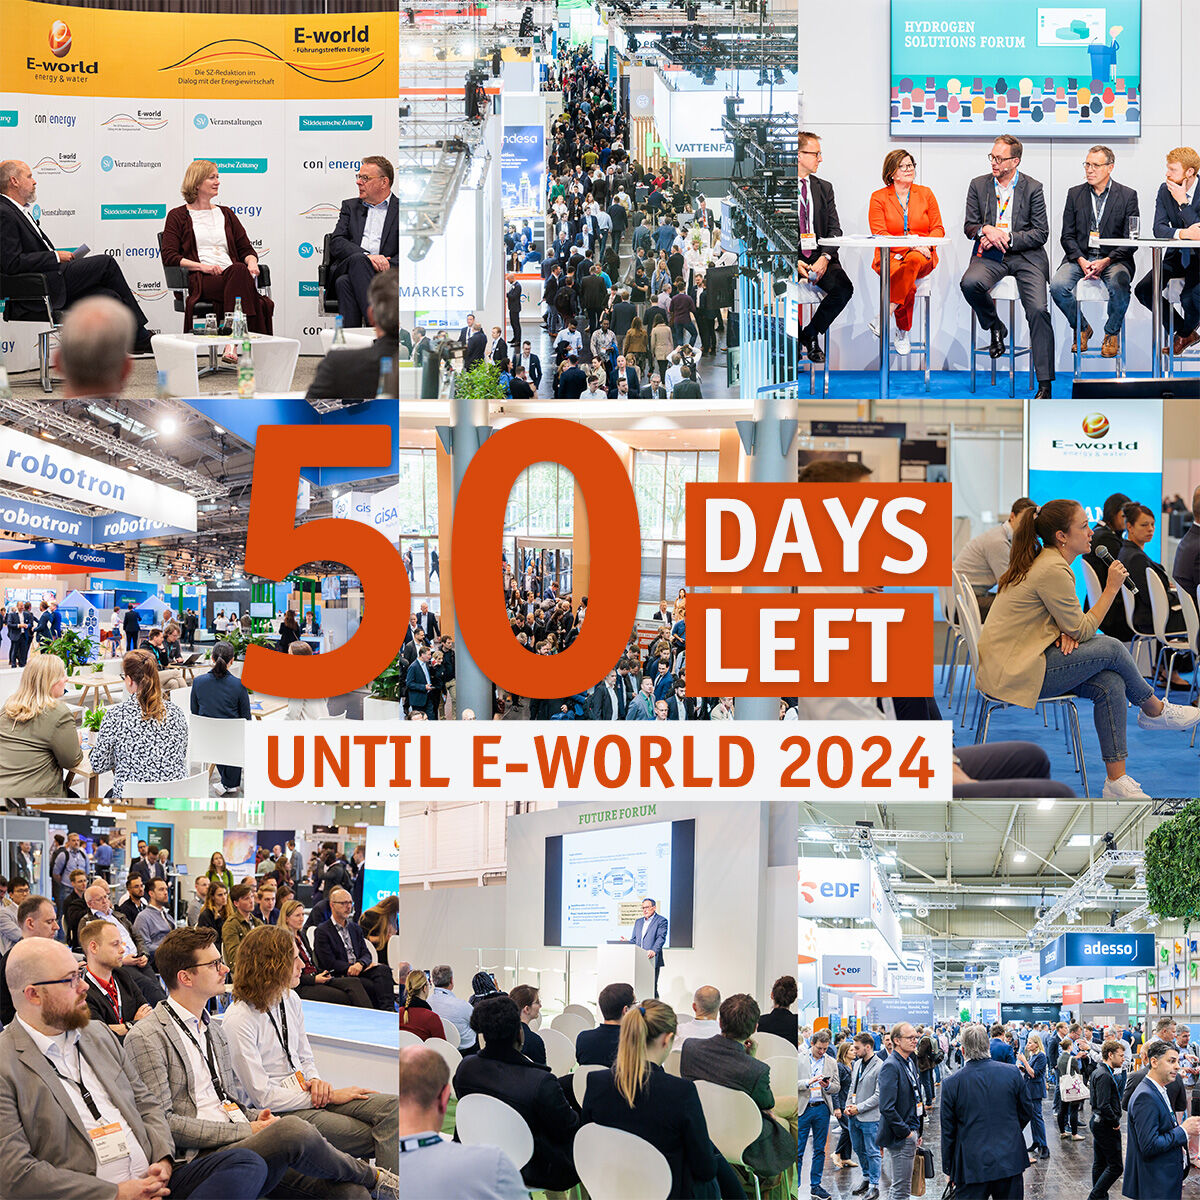 🎇Happy New Year! 🎉As we are back to our traditional date this year, the final stretch of our preparations begins now: In 50 days we will be opening the Essen exhibition halls for you again! We are already looking forward to welcoming you and our exhibitor to #Eworld24! 🧡